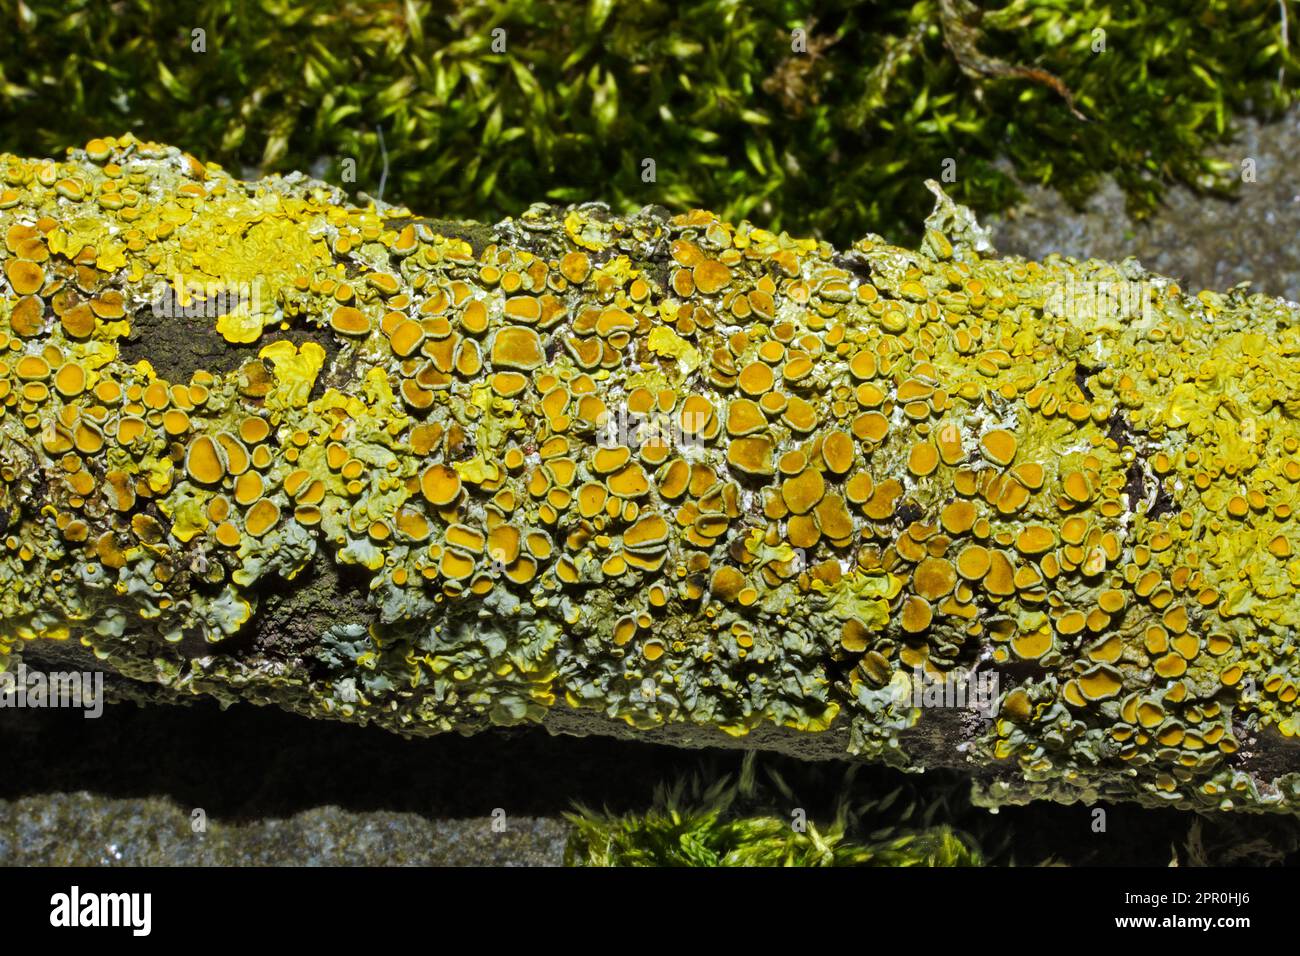 Xanthoria parietina (common orange lichen) can be found on seashore rocks and on inland rocks or tree bark. It is a cosmopolitan species. Stock Photo